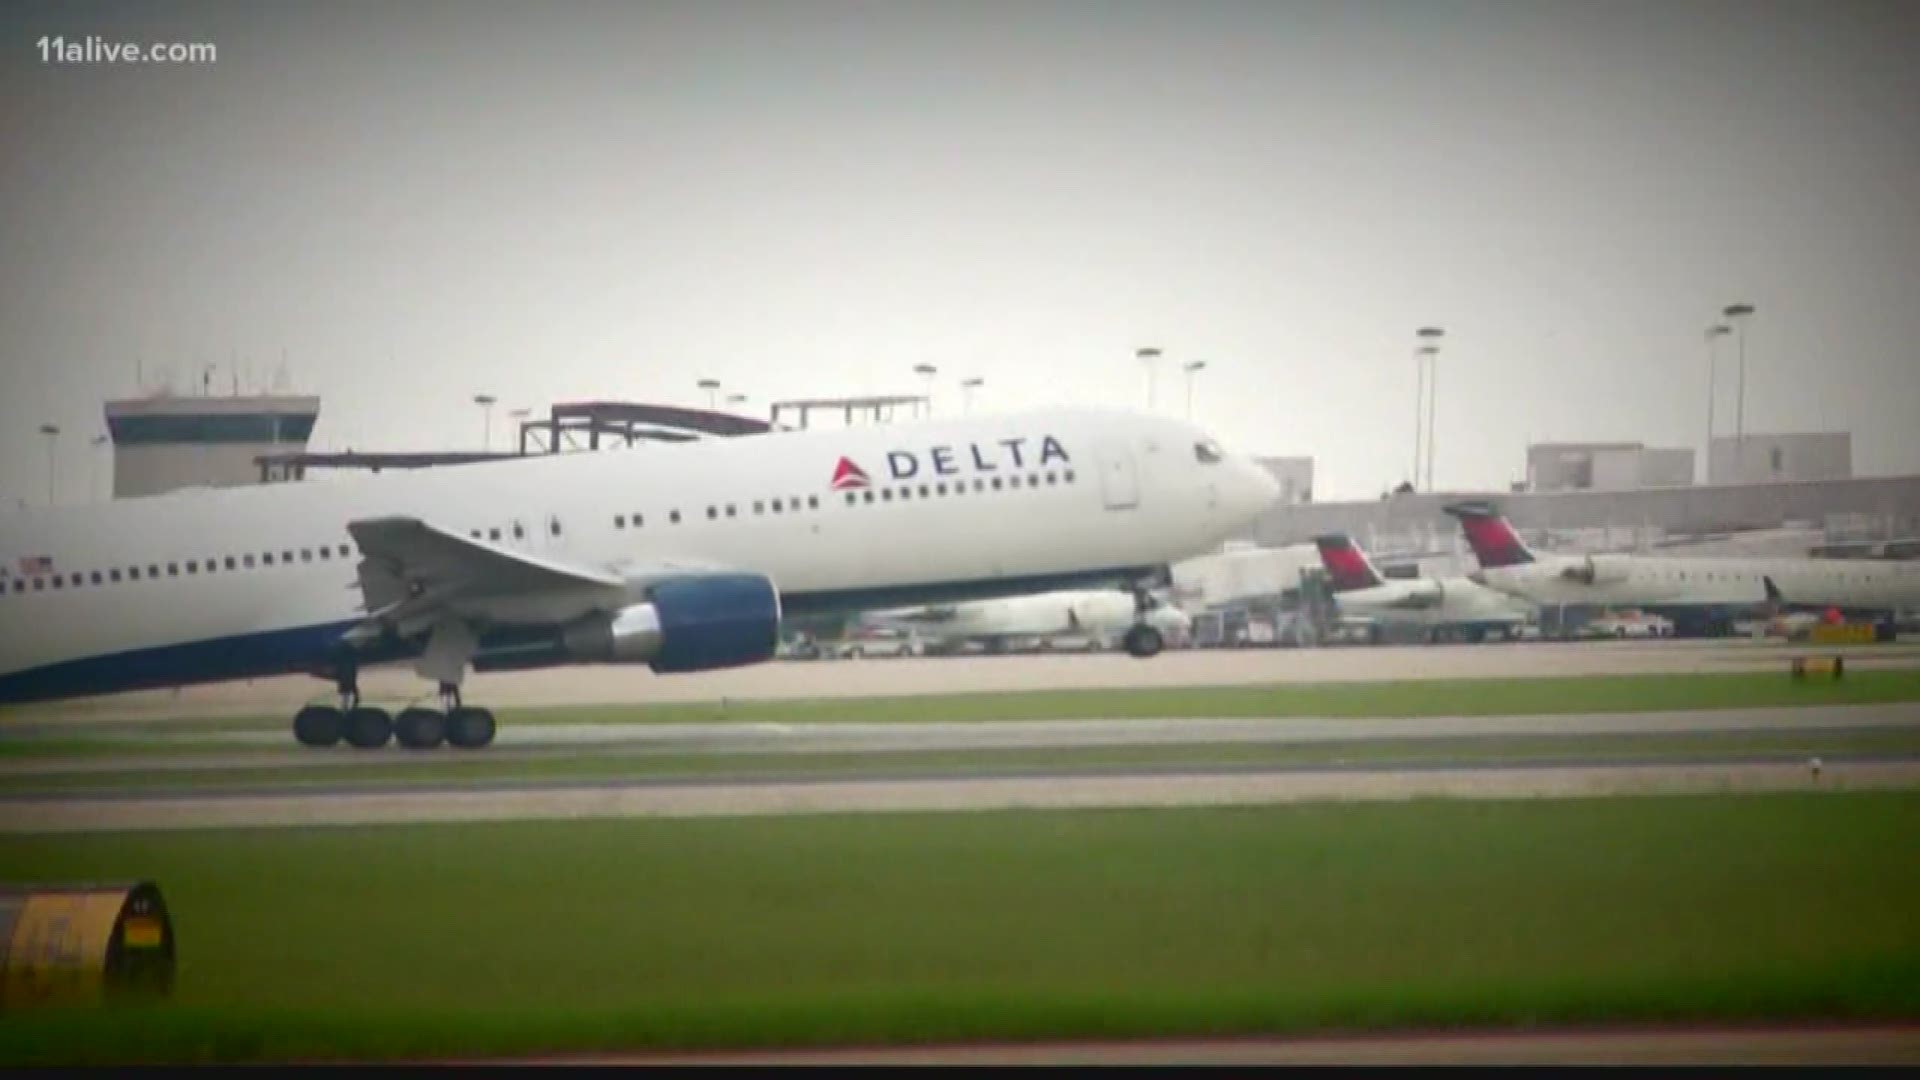 Delta Air Lines on Sunday said it is suspending flights to Milan, Italy, until early May.